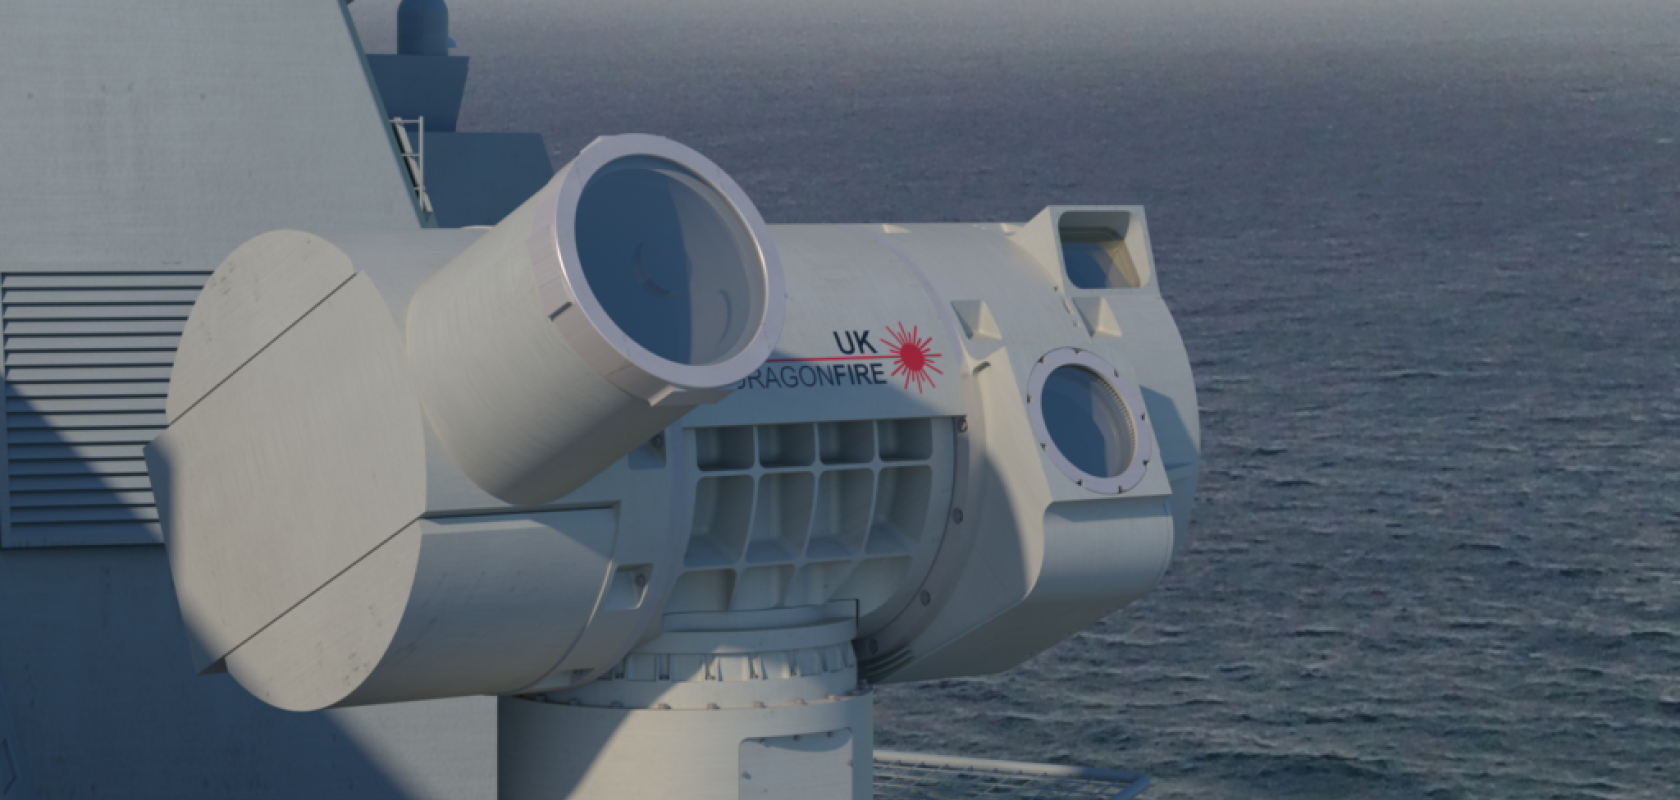 The DragonFire laser directed eneregy weapon system on board a ship